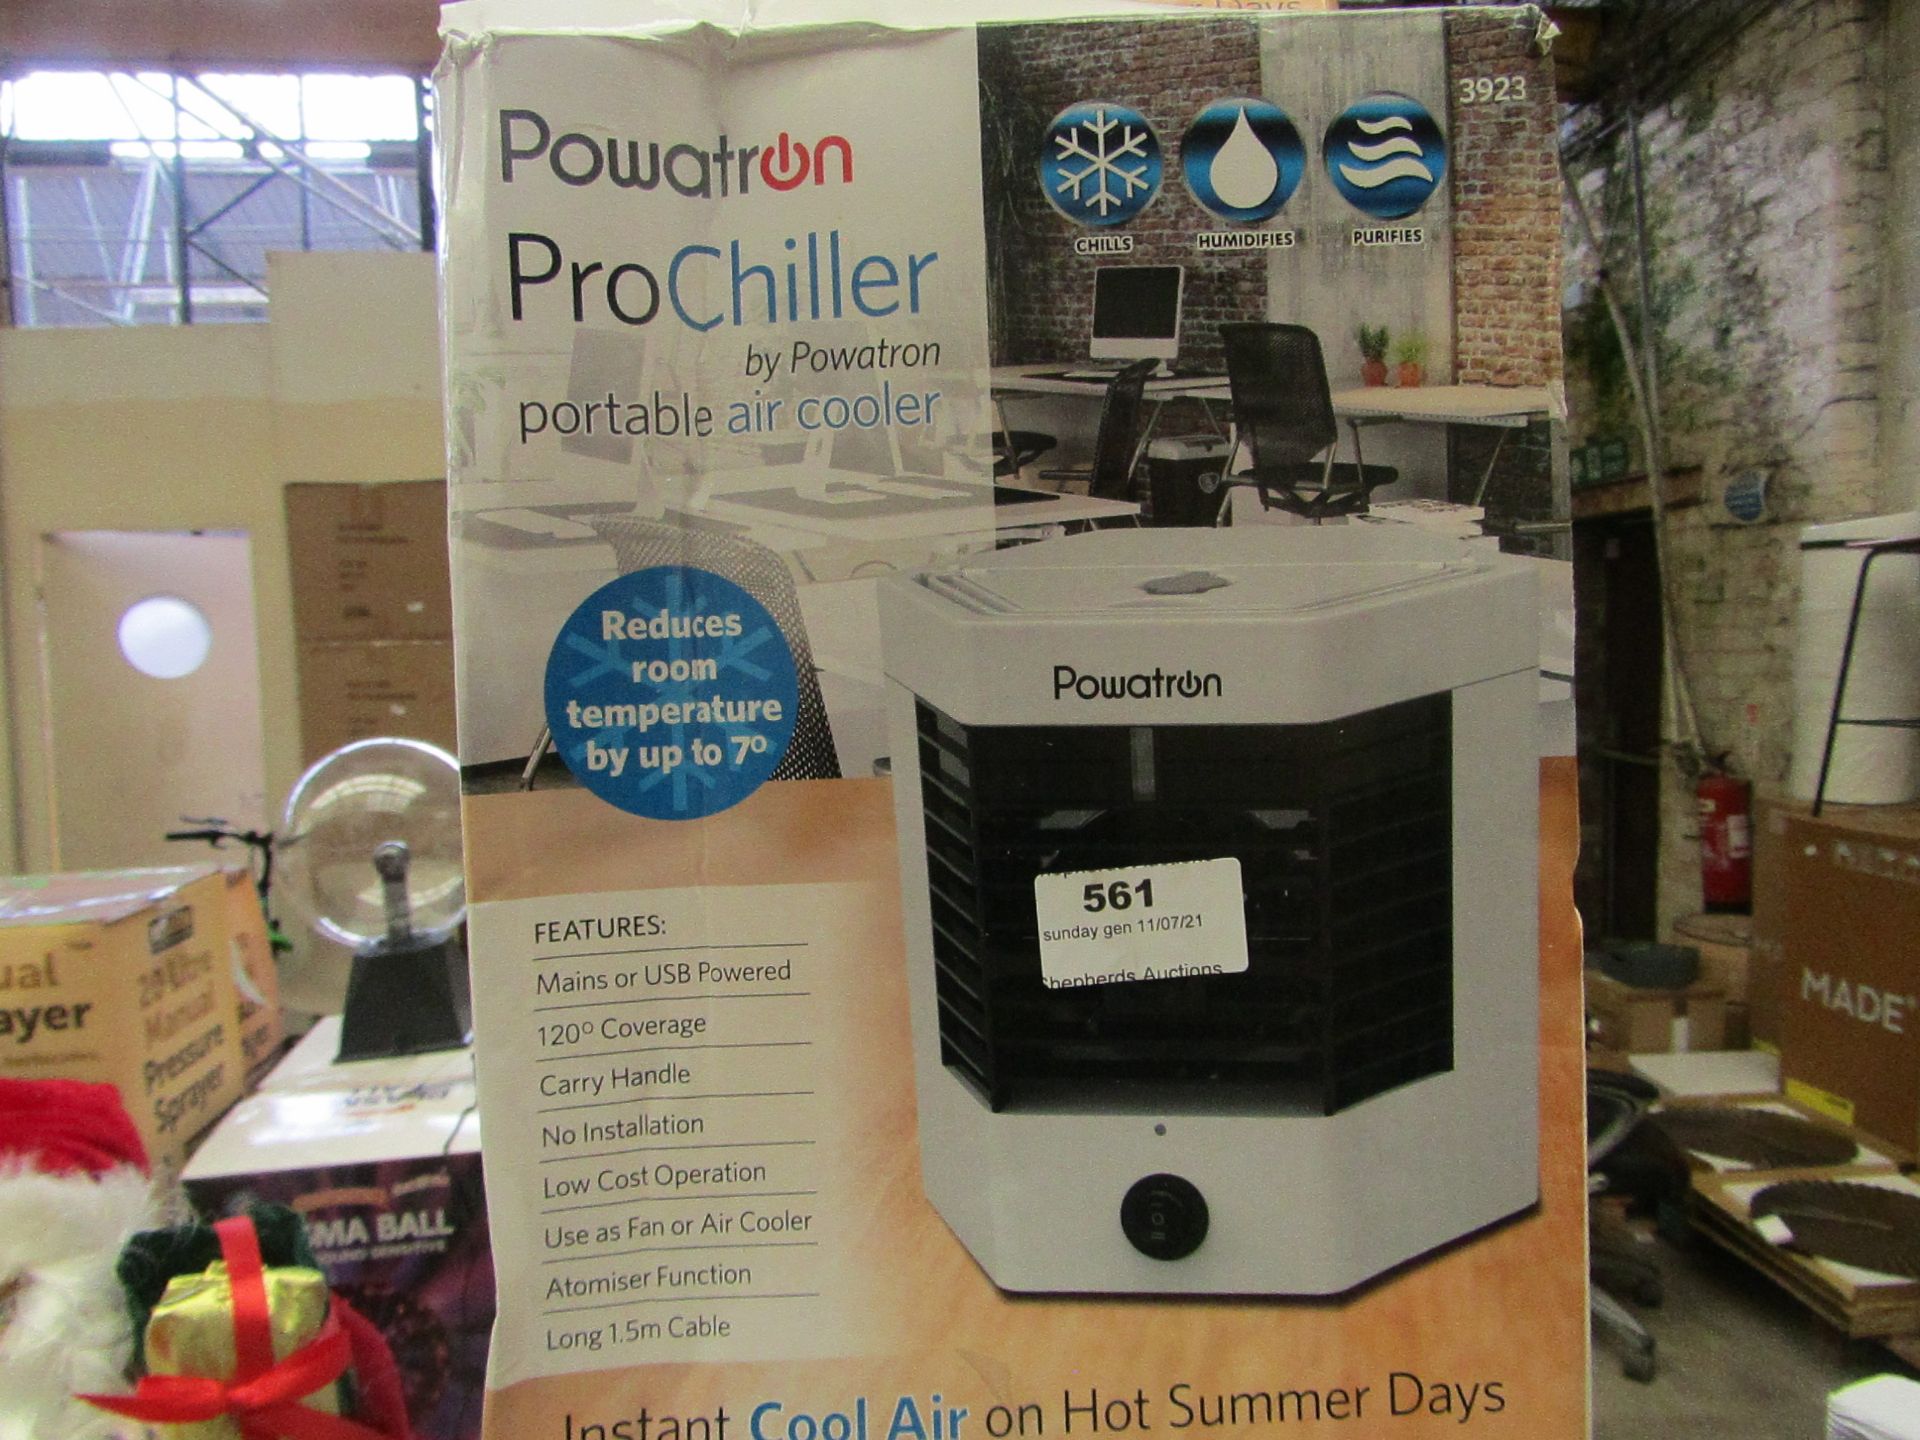 2x powatron pro chiller portable air cooler, unchecked and boxed.